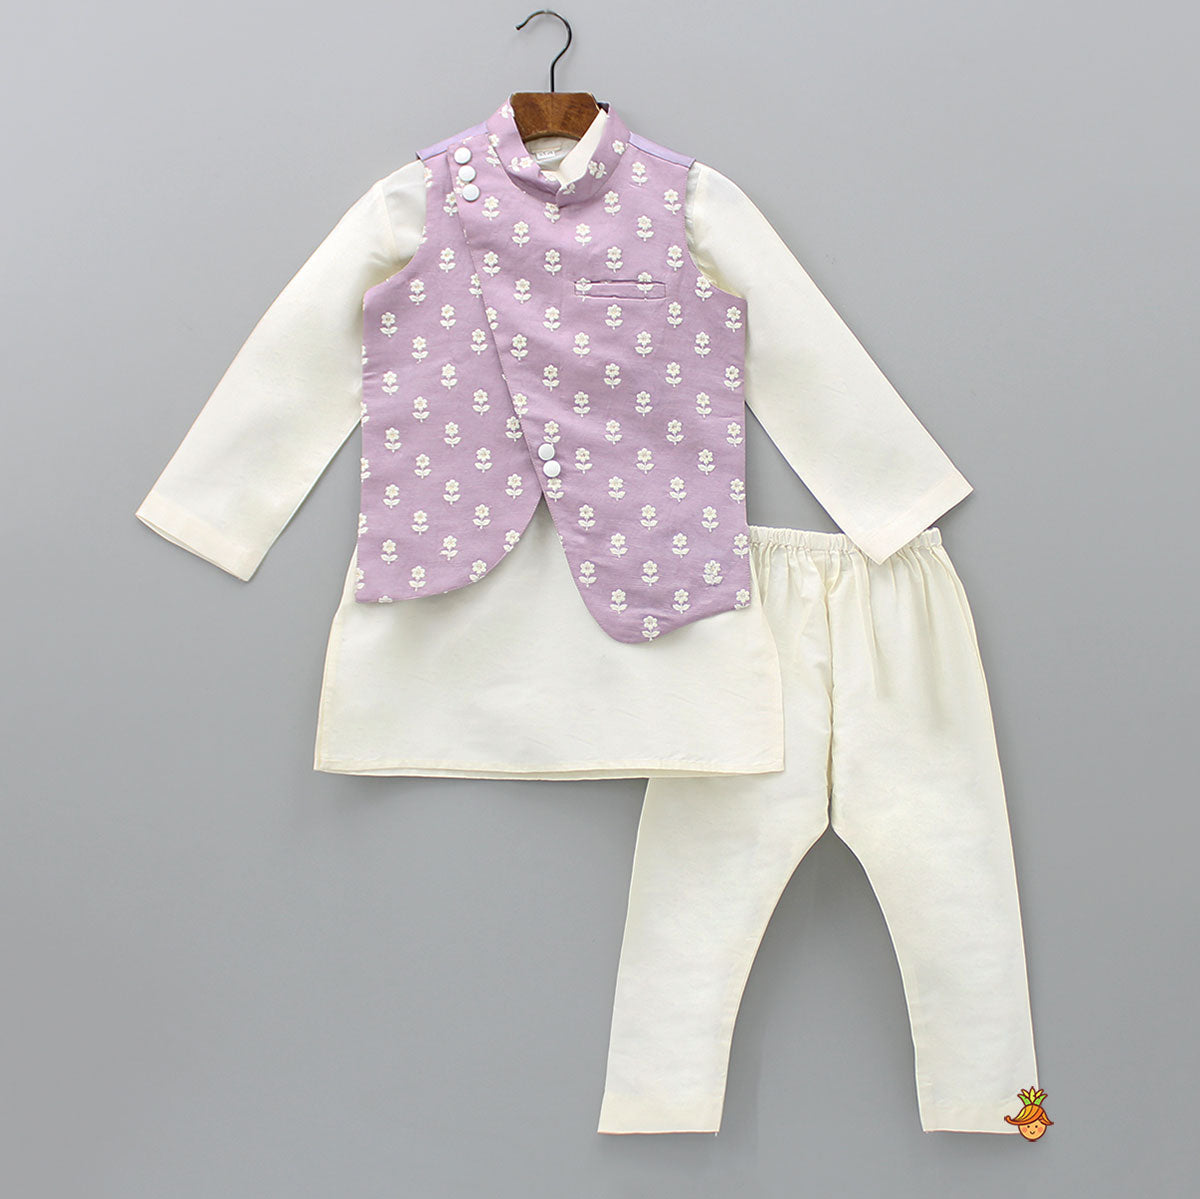 Pre Order: Off White Ethnic Kurta With Lilac Floral Embroidered Asymmetric Jacket And Pyjama